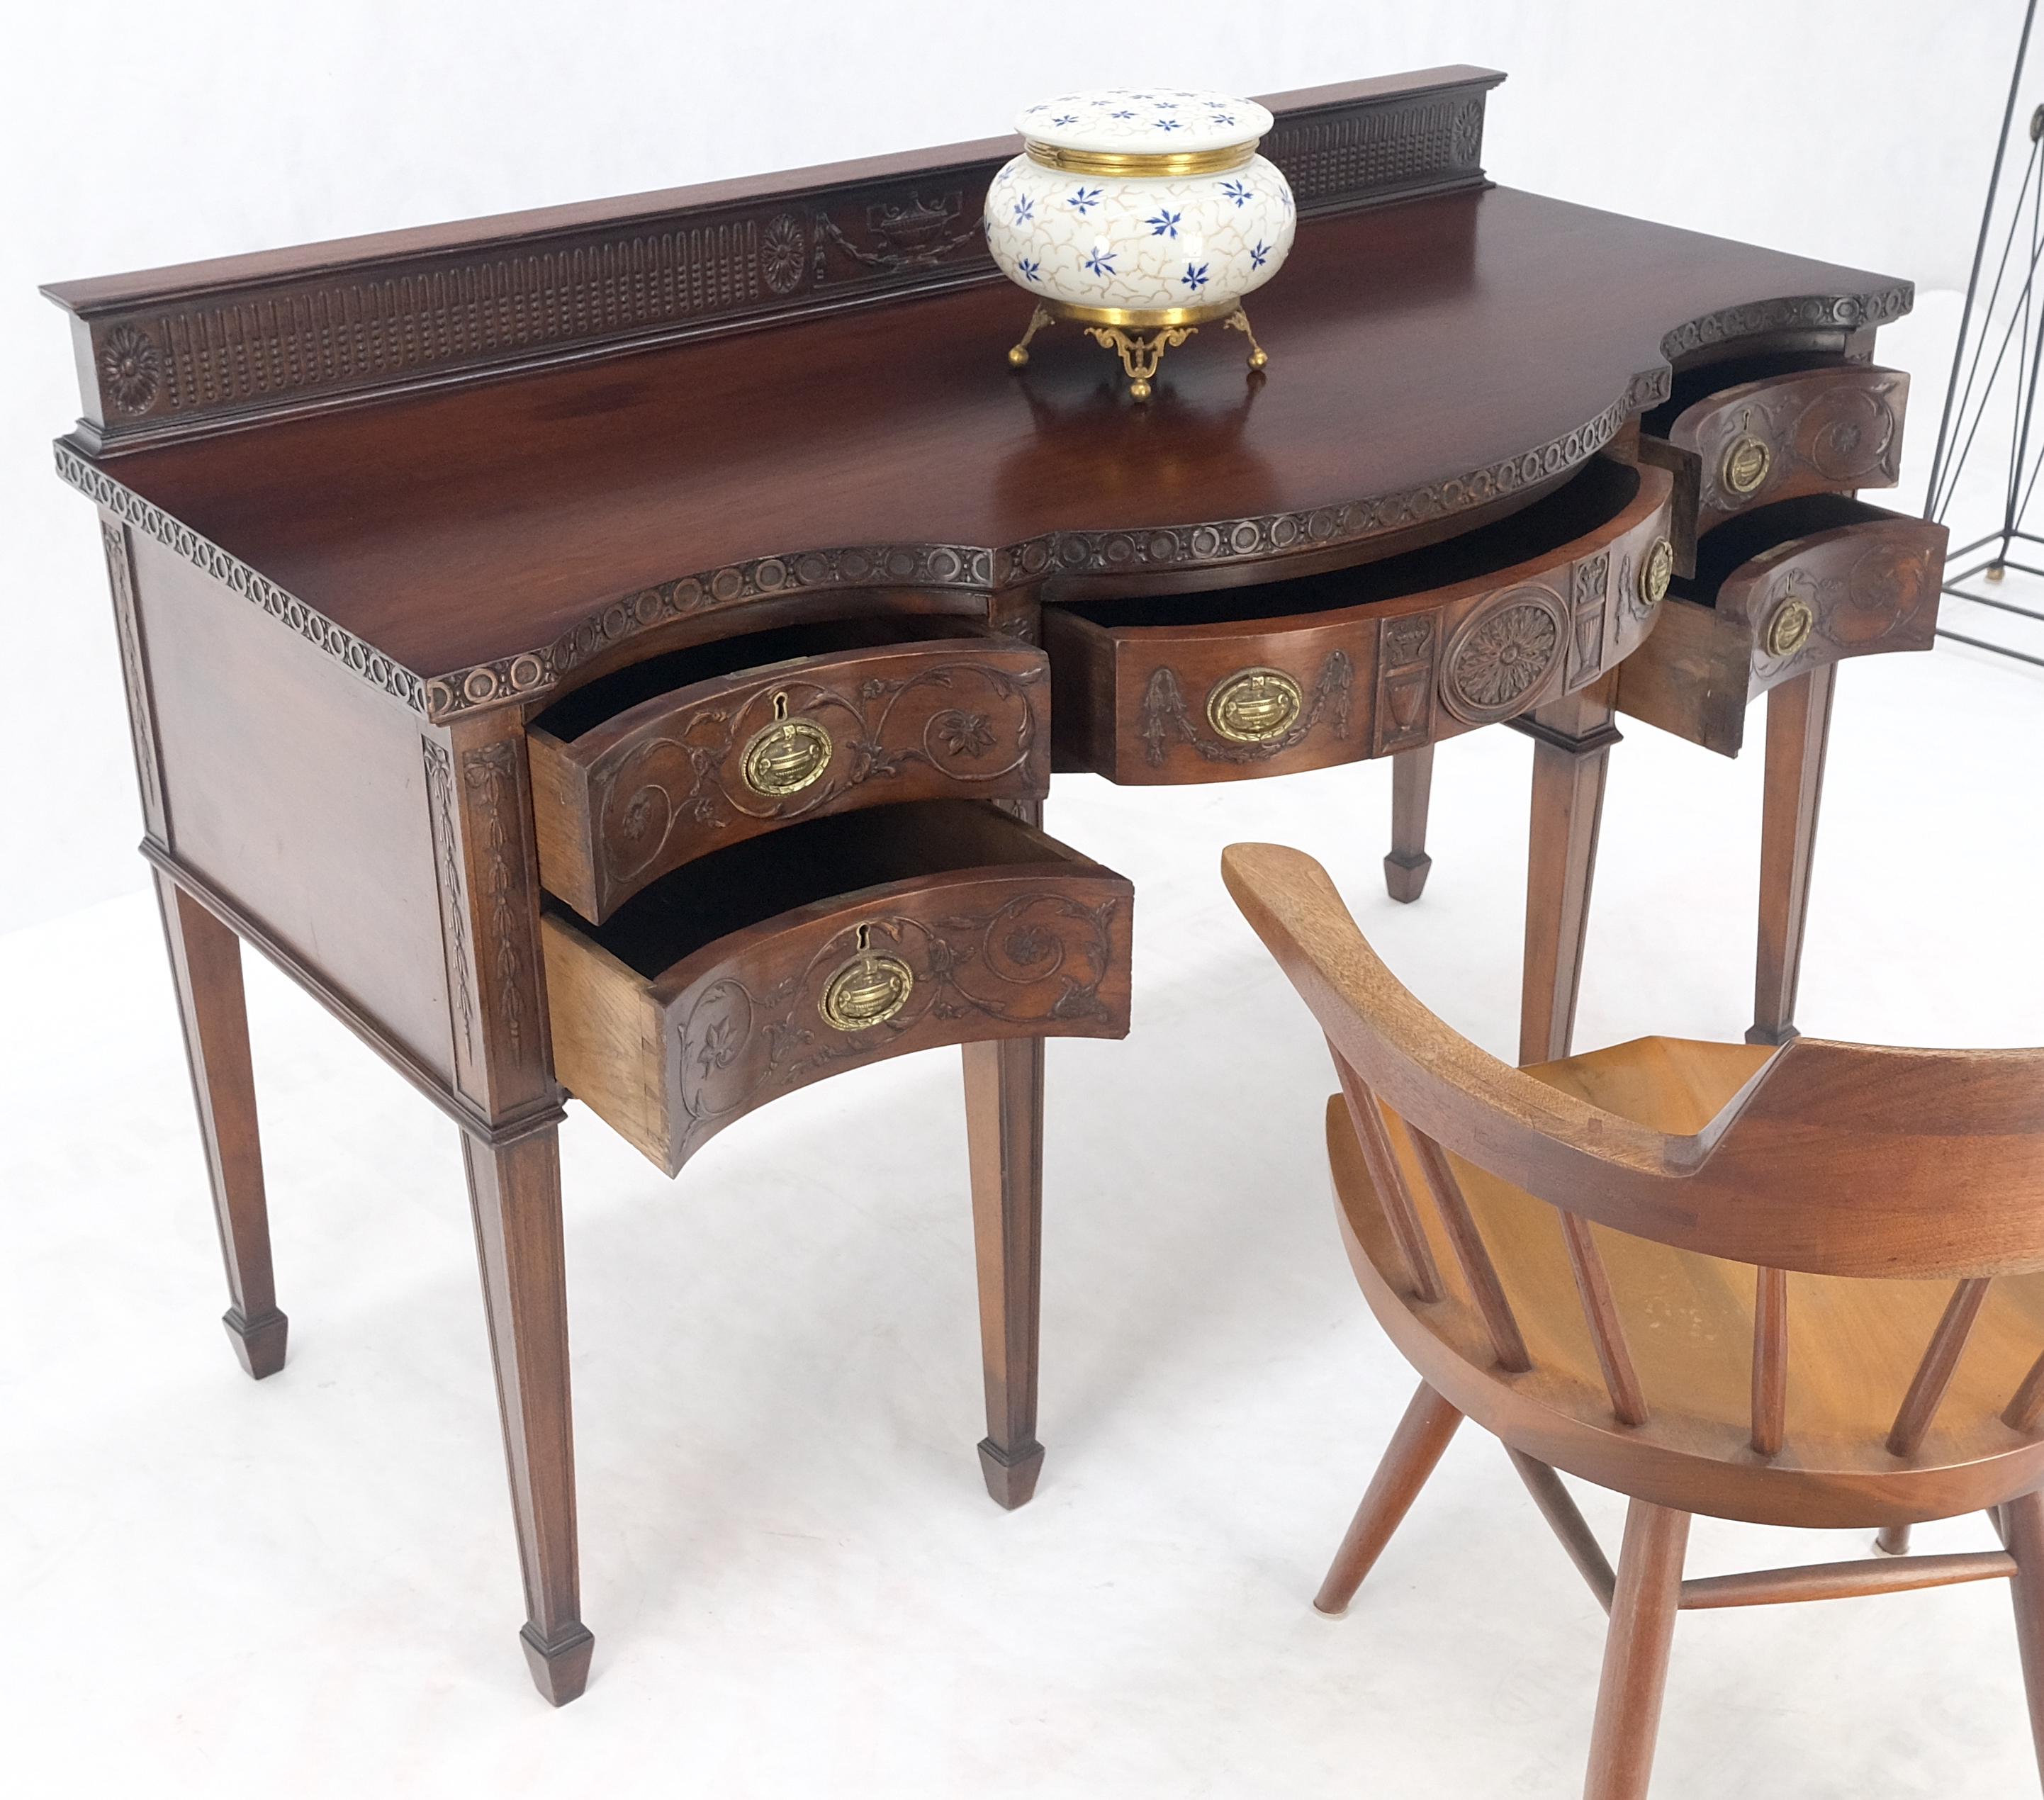 Fine Bench Made Carved Mahogany Serpentine Front  Dovetail Drawers Vanity Desk In Good Condition For Sale In Rockaway, NJ